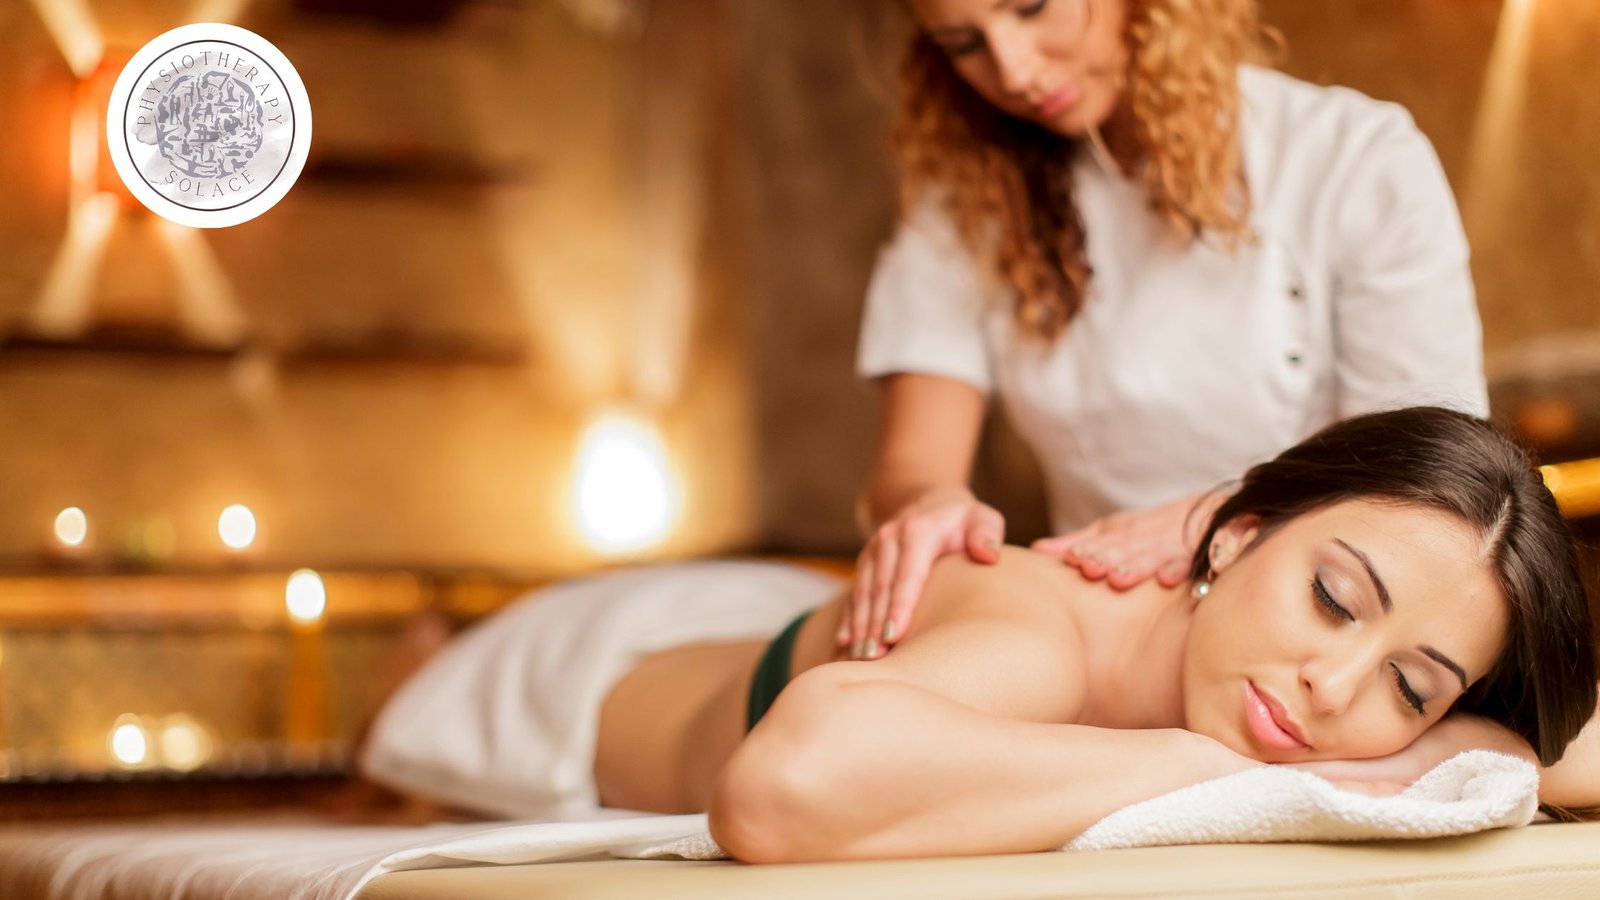 How Does An Appointment With A Massage Therapist Bring Harmony To Your Body And Soul?